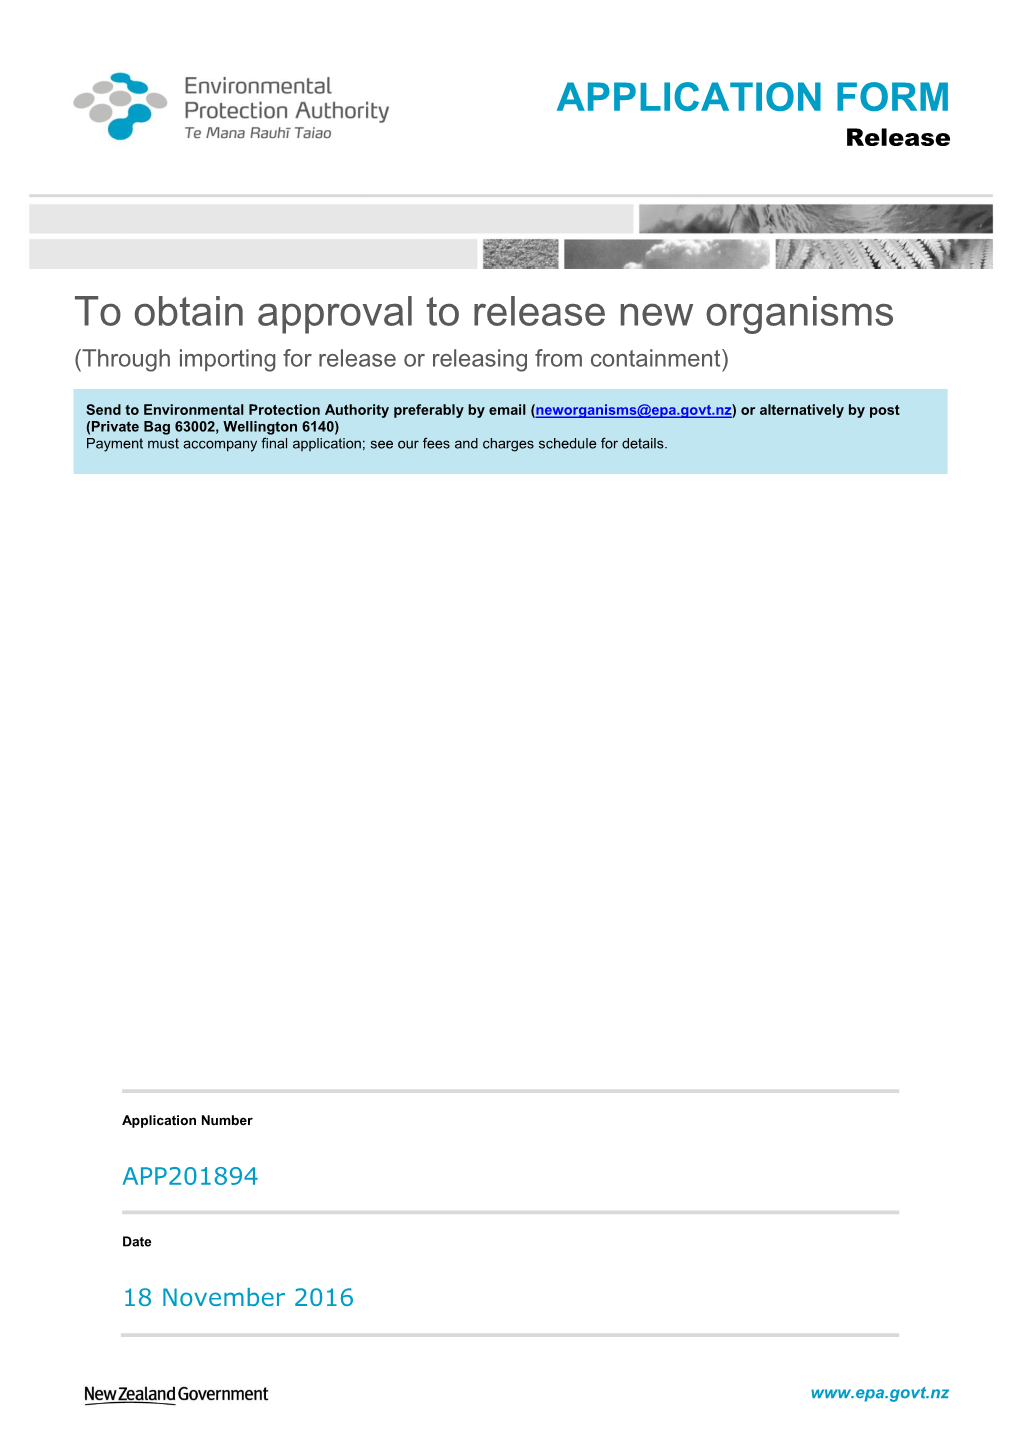 To Obtain Approval to Release New Organisms (Through Importing for Release Or Releasing from Containment)